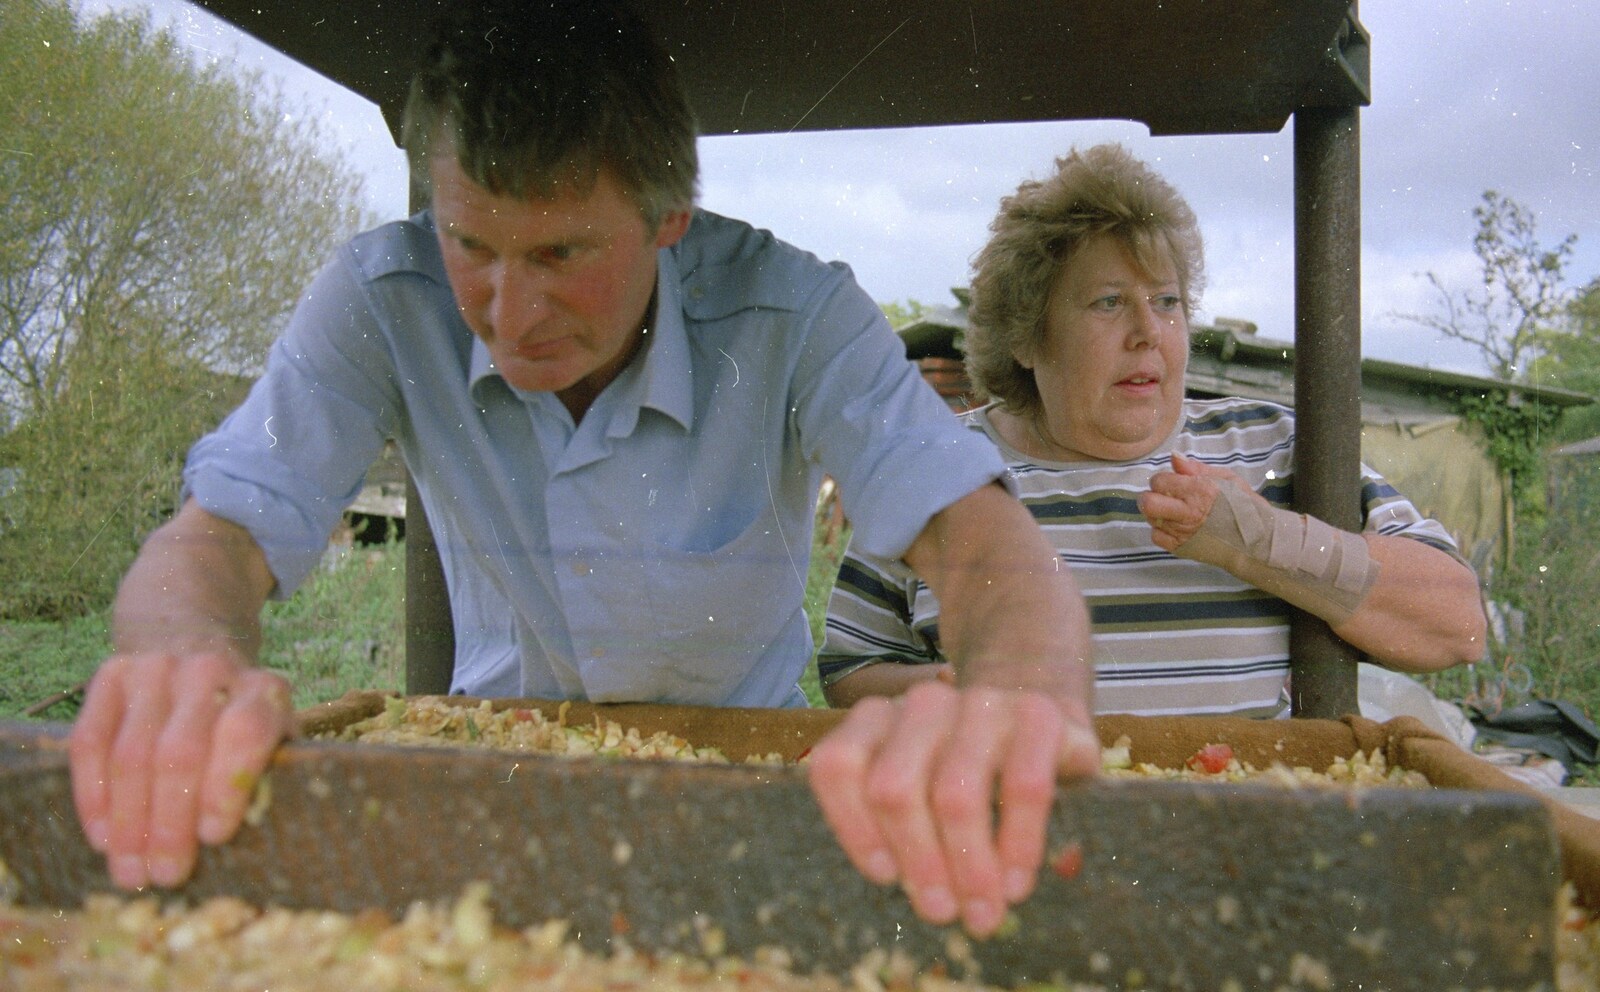 Intensive apple squashing from Cider Making With Geoff and Brenda, Stuston, Suffolk - 10th September 1998